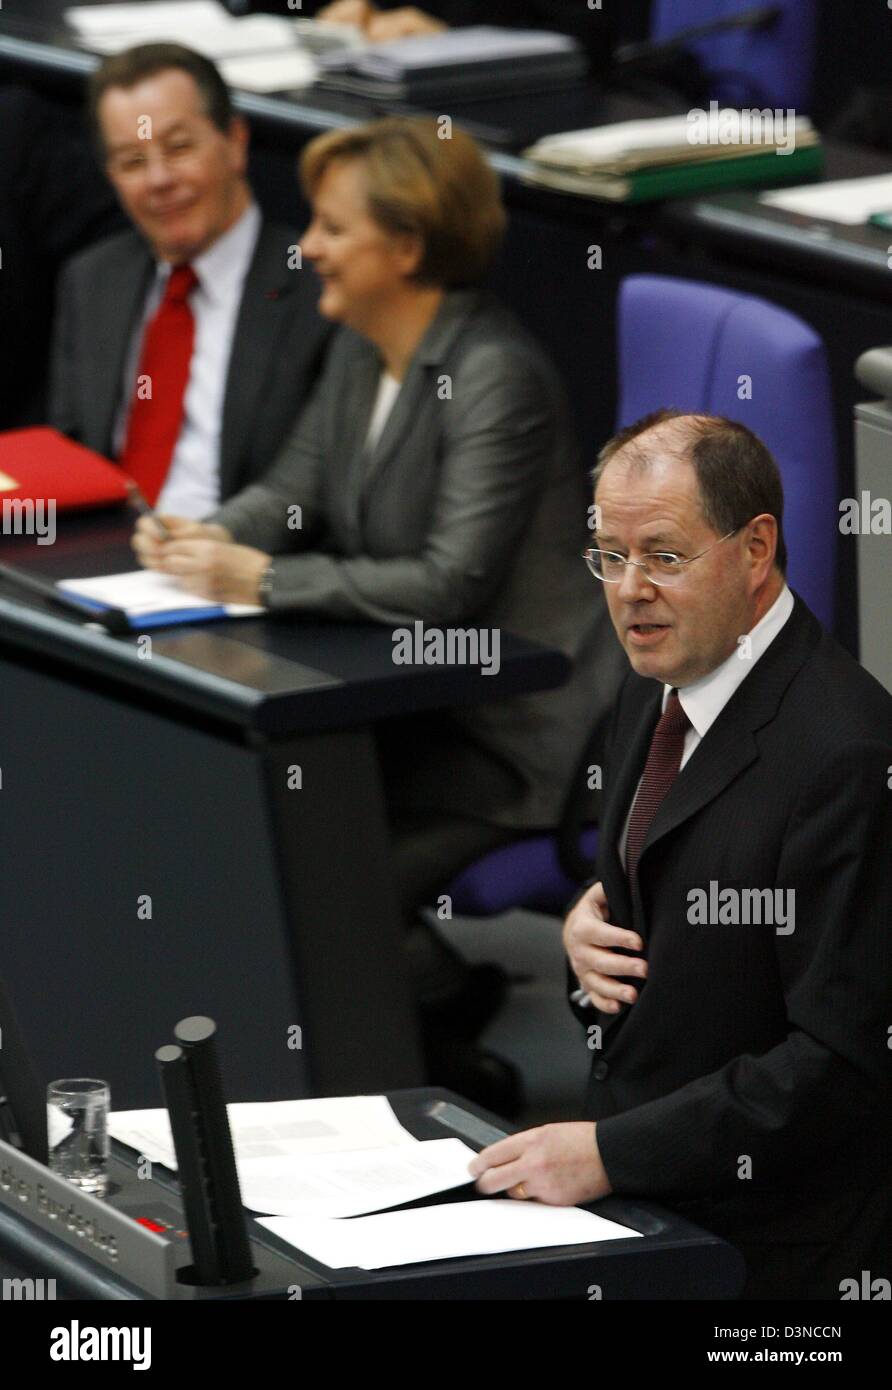 Federal Minister of Finance Peer Steinbrueck (R) comments on the governmental budget draft in the Bundestag in Berlin, Germany, Tuesday, 28 March 2006. Behind him on the government bench are Vice-Chancellor and Minister of Labour Franz Muentefering (L) and Federal Chancellor Angela Merkel (C). The parliament debates the budget for 2006 in the first reading. Photo: Steffen Kugler Stock Photo